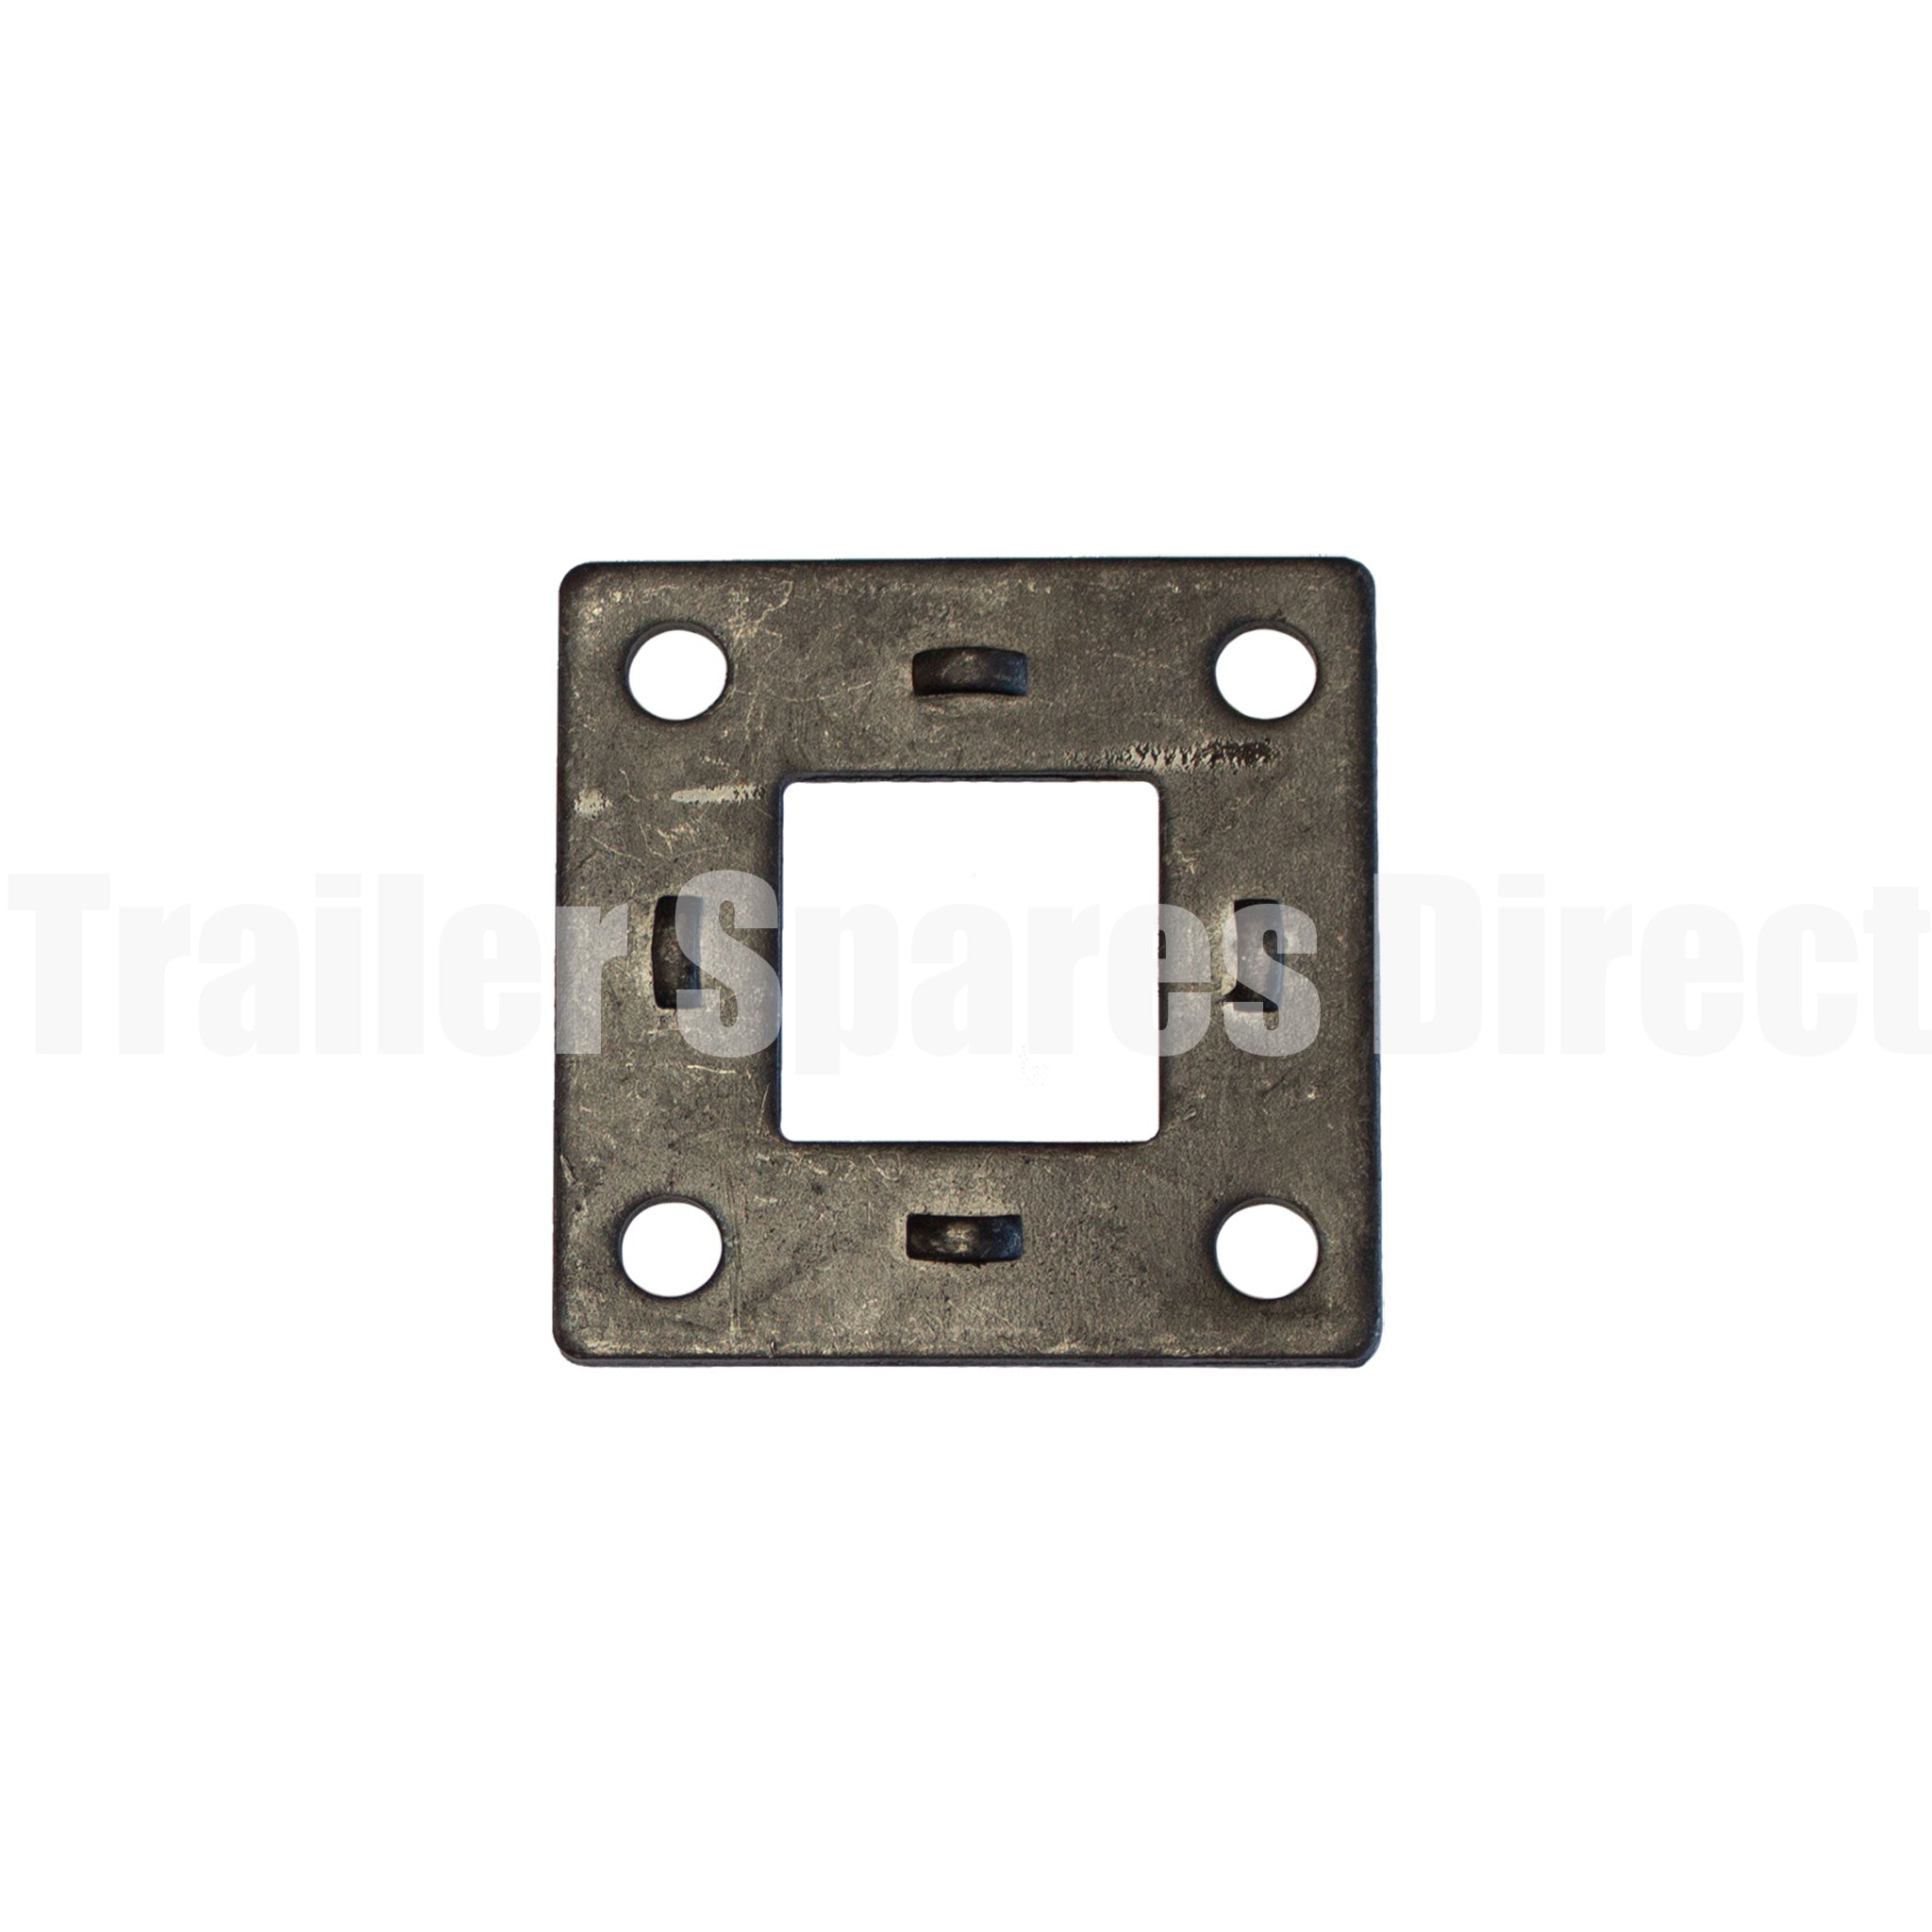 Weld-on mounting plate for 9 inch mechanical or 10 inch electric brakes - Pick axle sizes